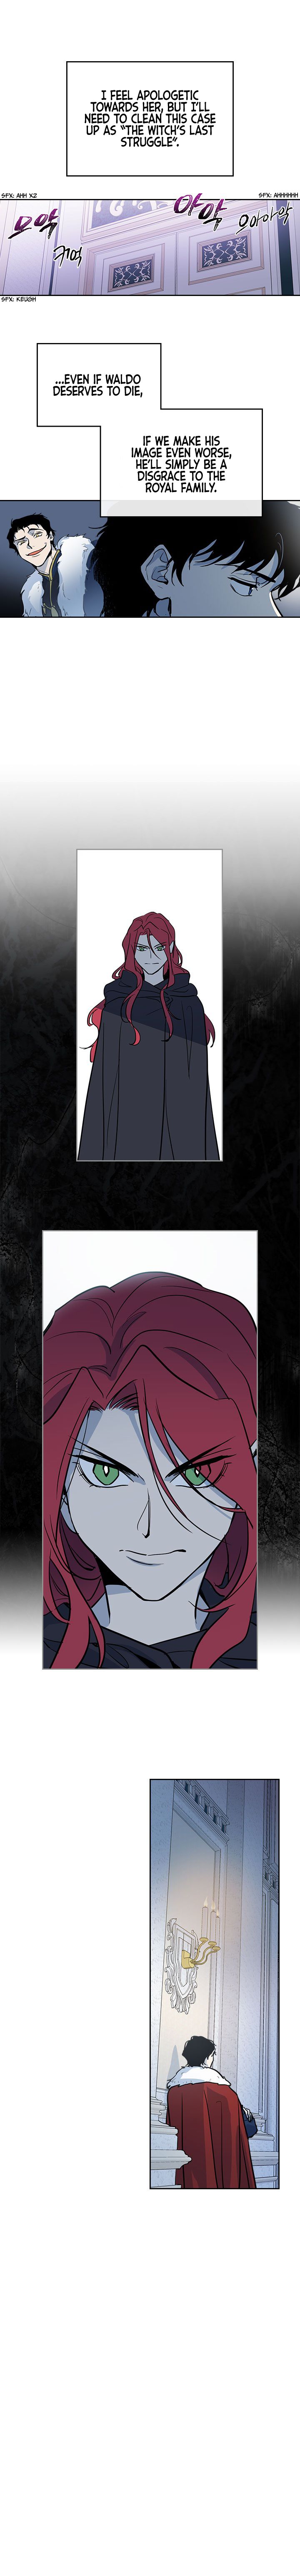 The Lady and the Beast Chapter 2 - Page 8